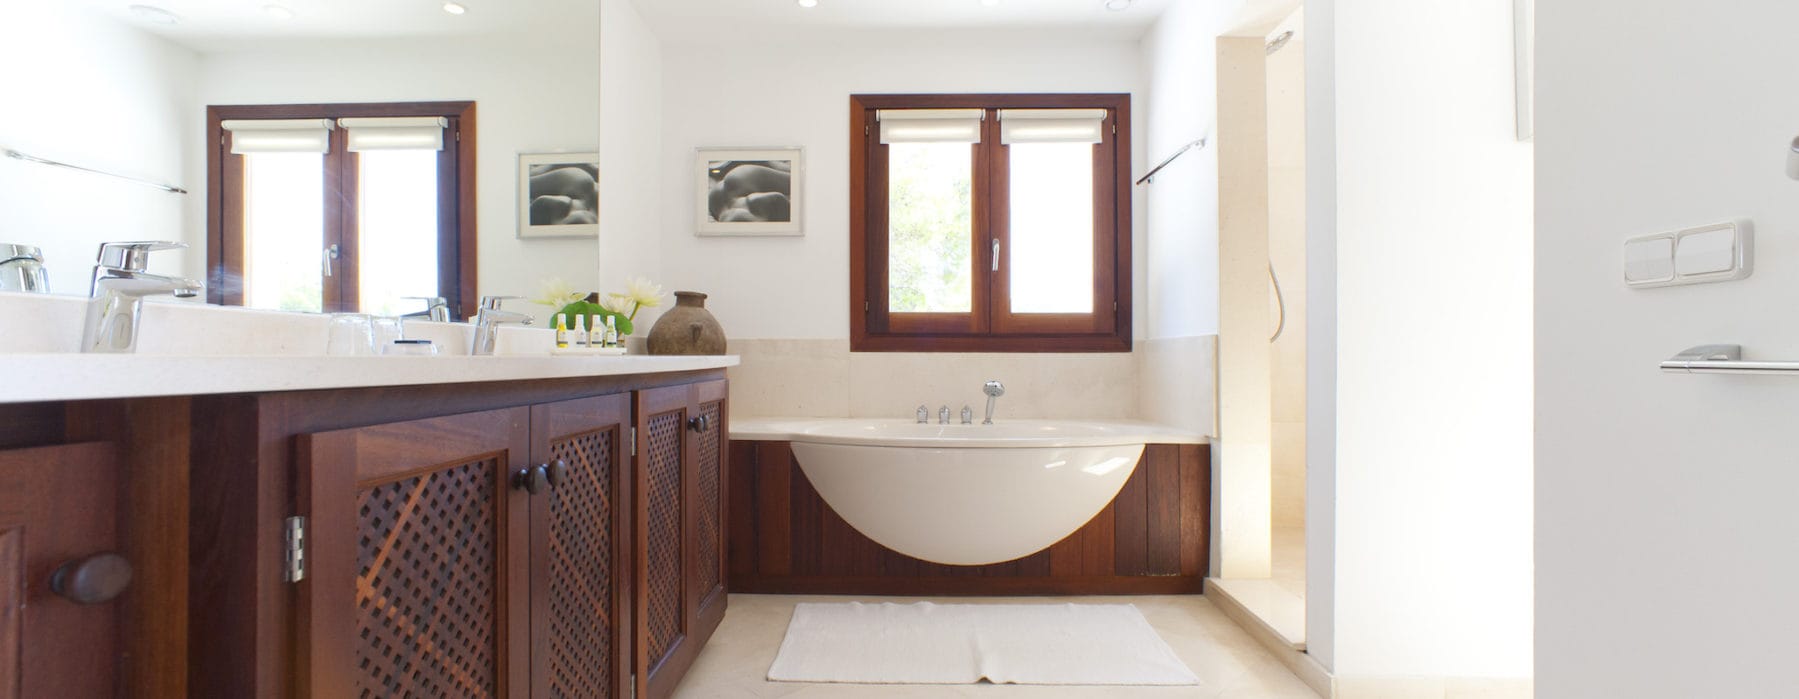 Modern bathroom with wooden finishes with bathtub and separate shower